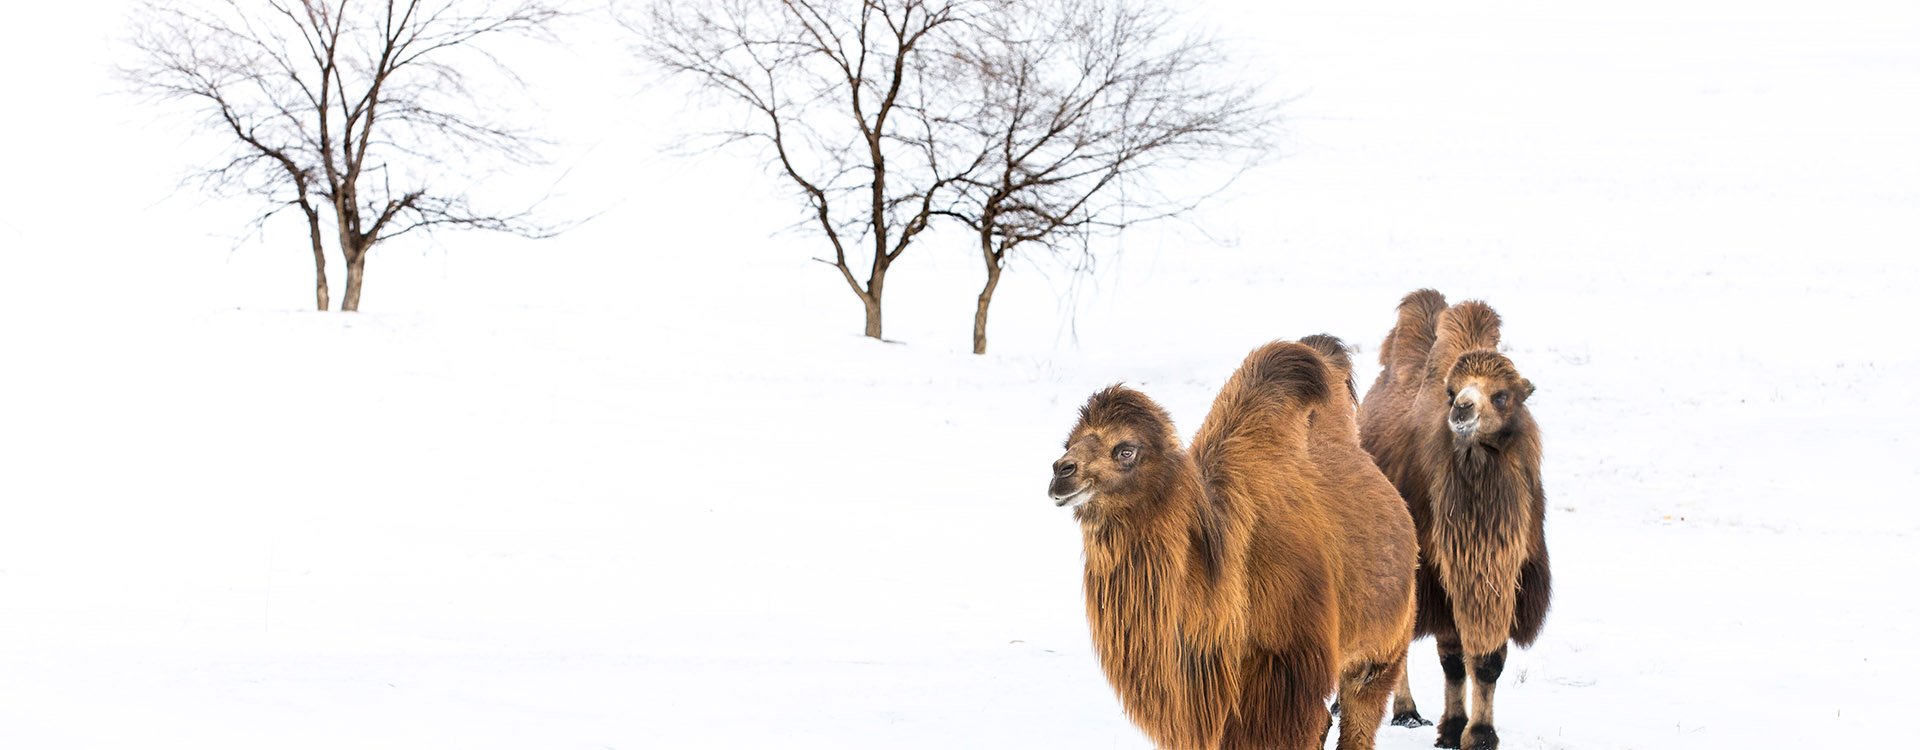 2 bactrian camels walking in a the winter landscape of northern Mongolia